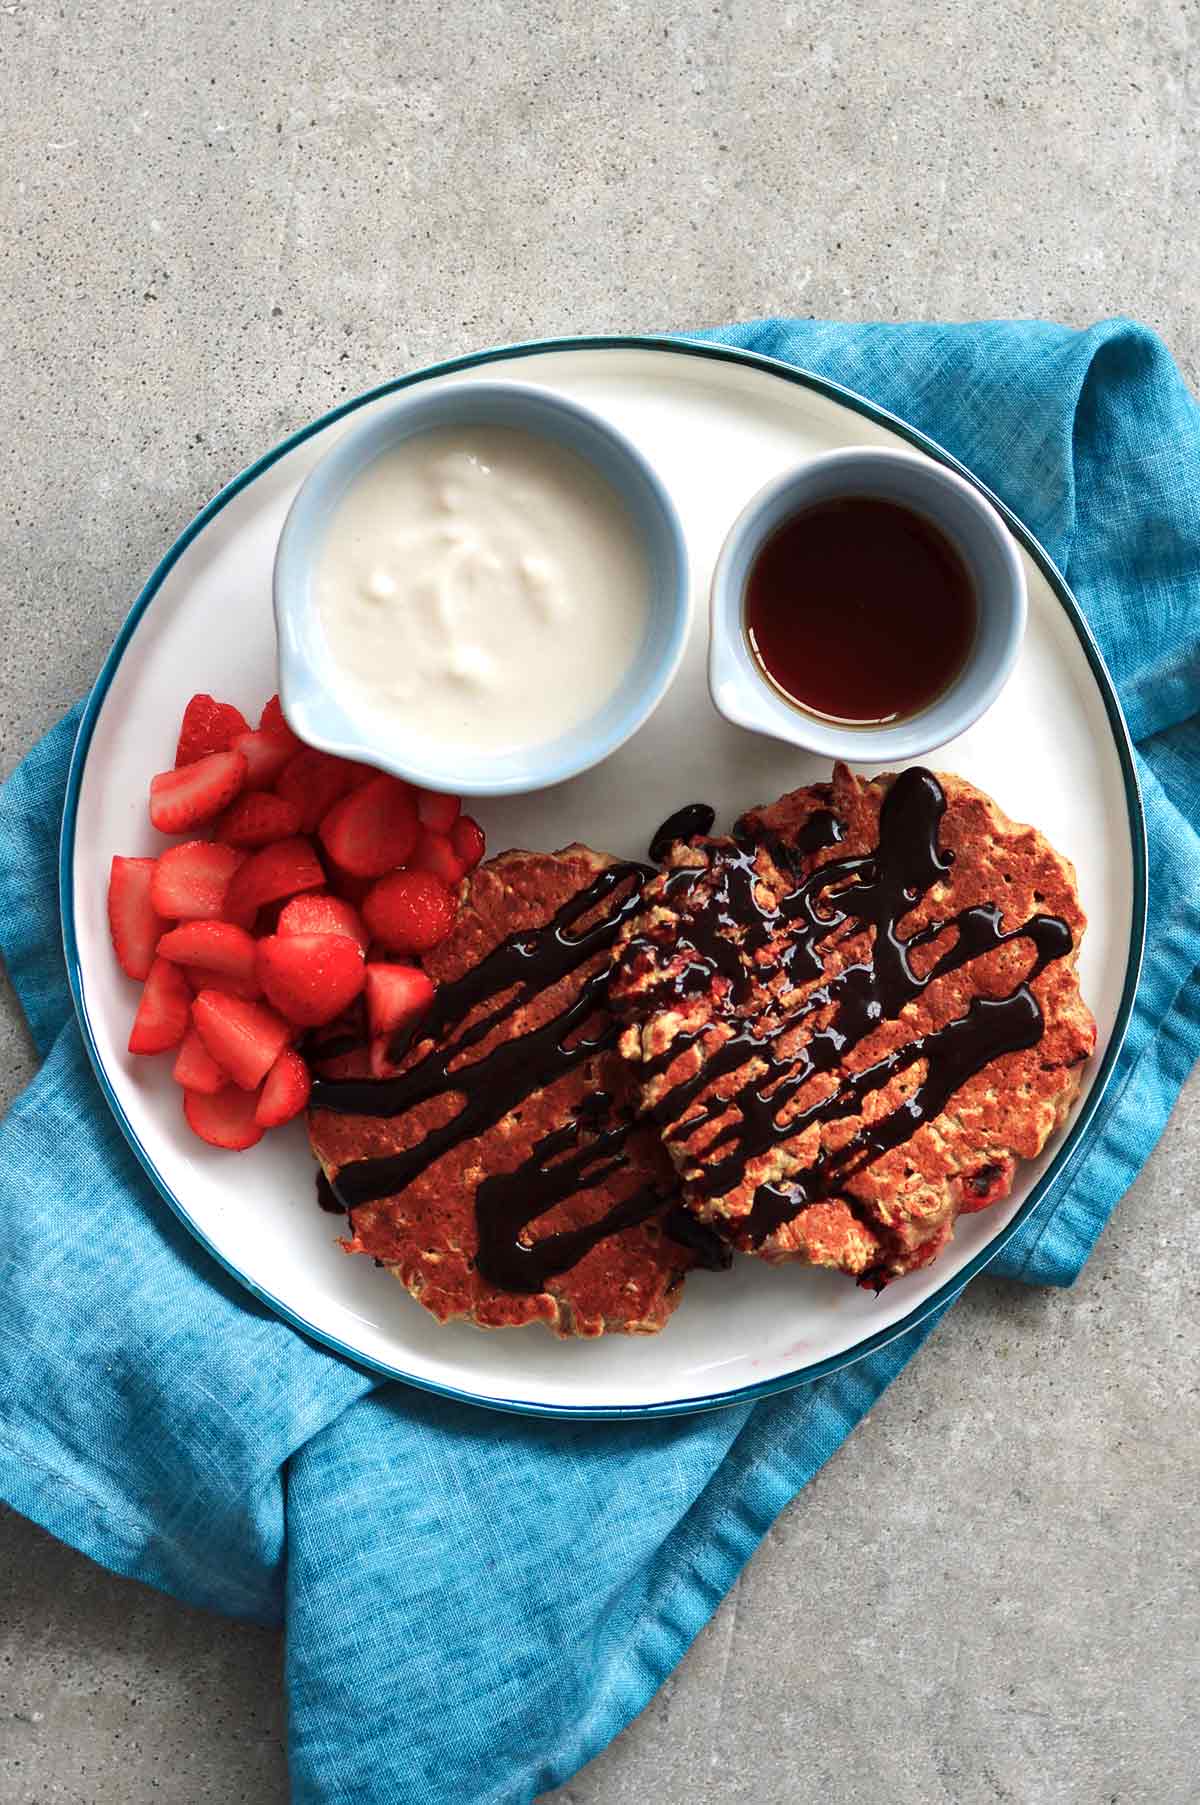 Strawberry and oatmeal pancakes served with maple syrup, yogurt and chopped strawberries